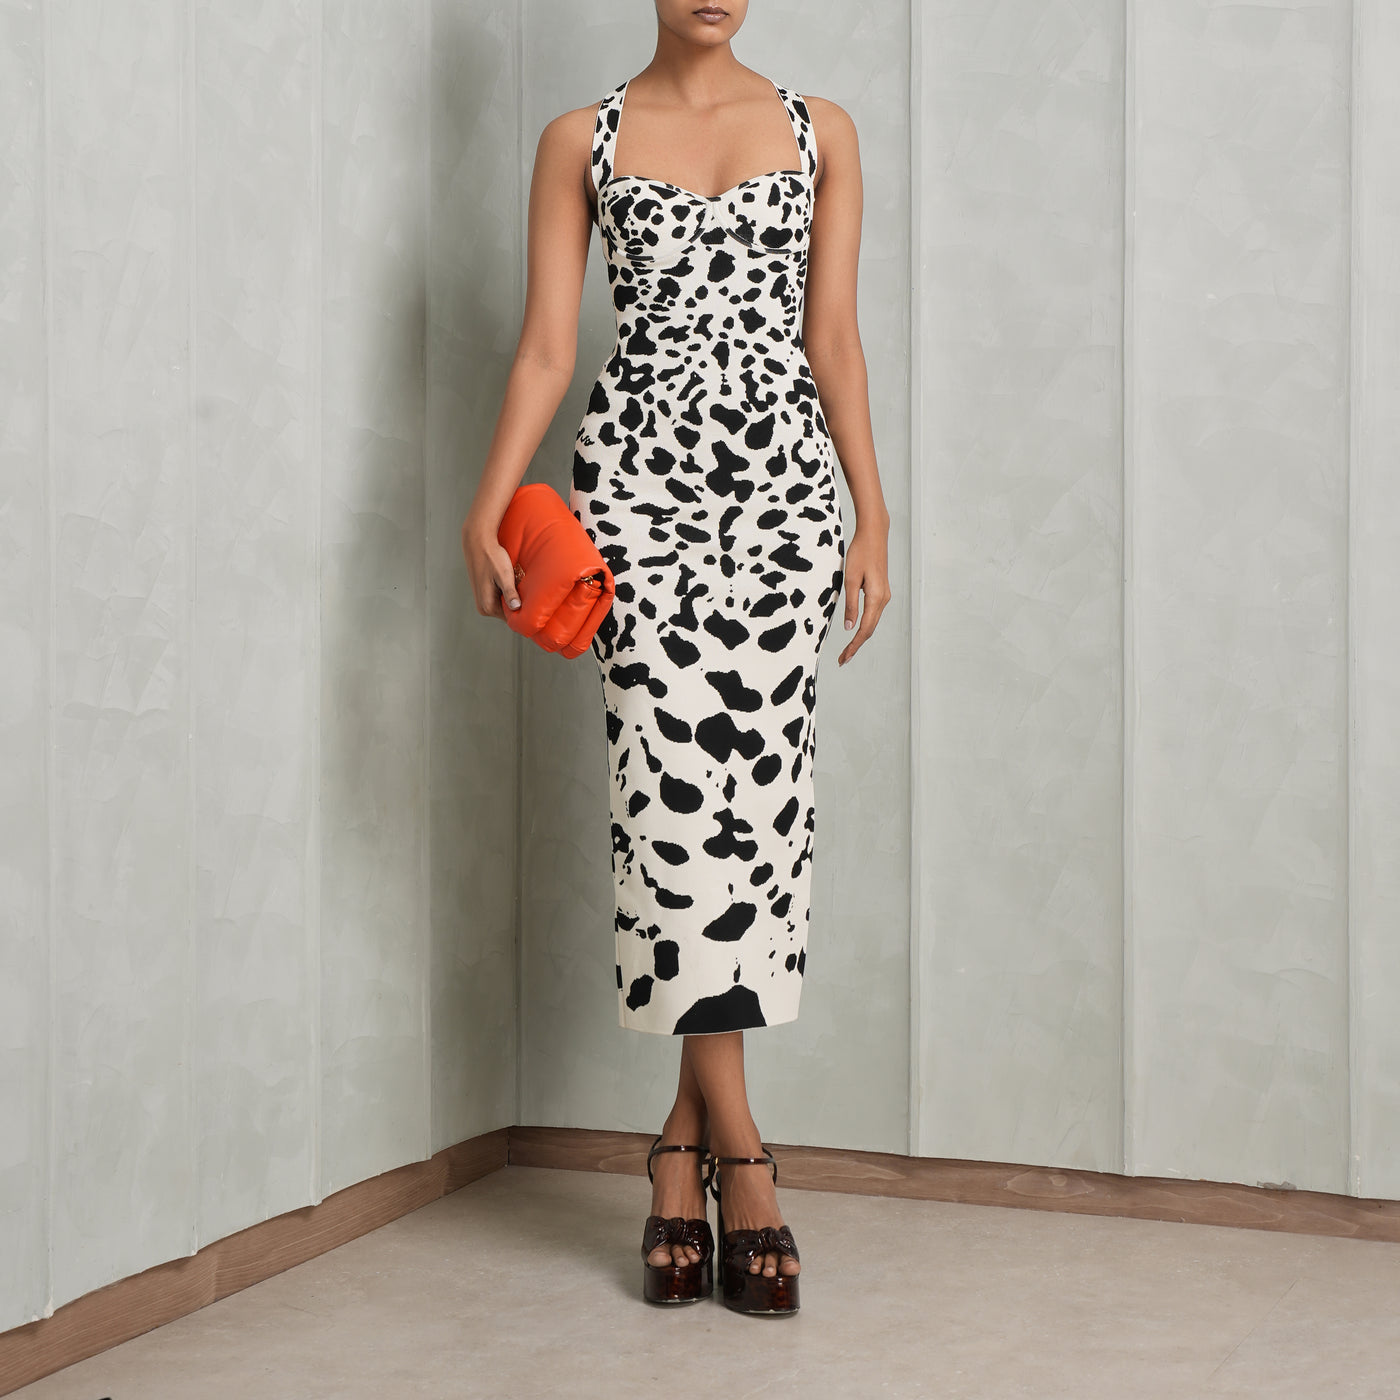 GALVAN LONDON knit black and white orchid dress